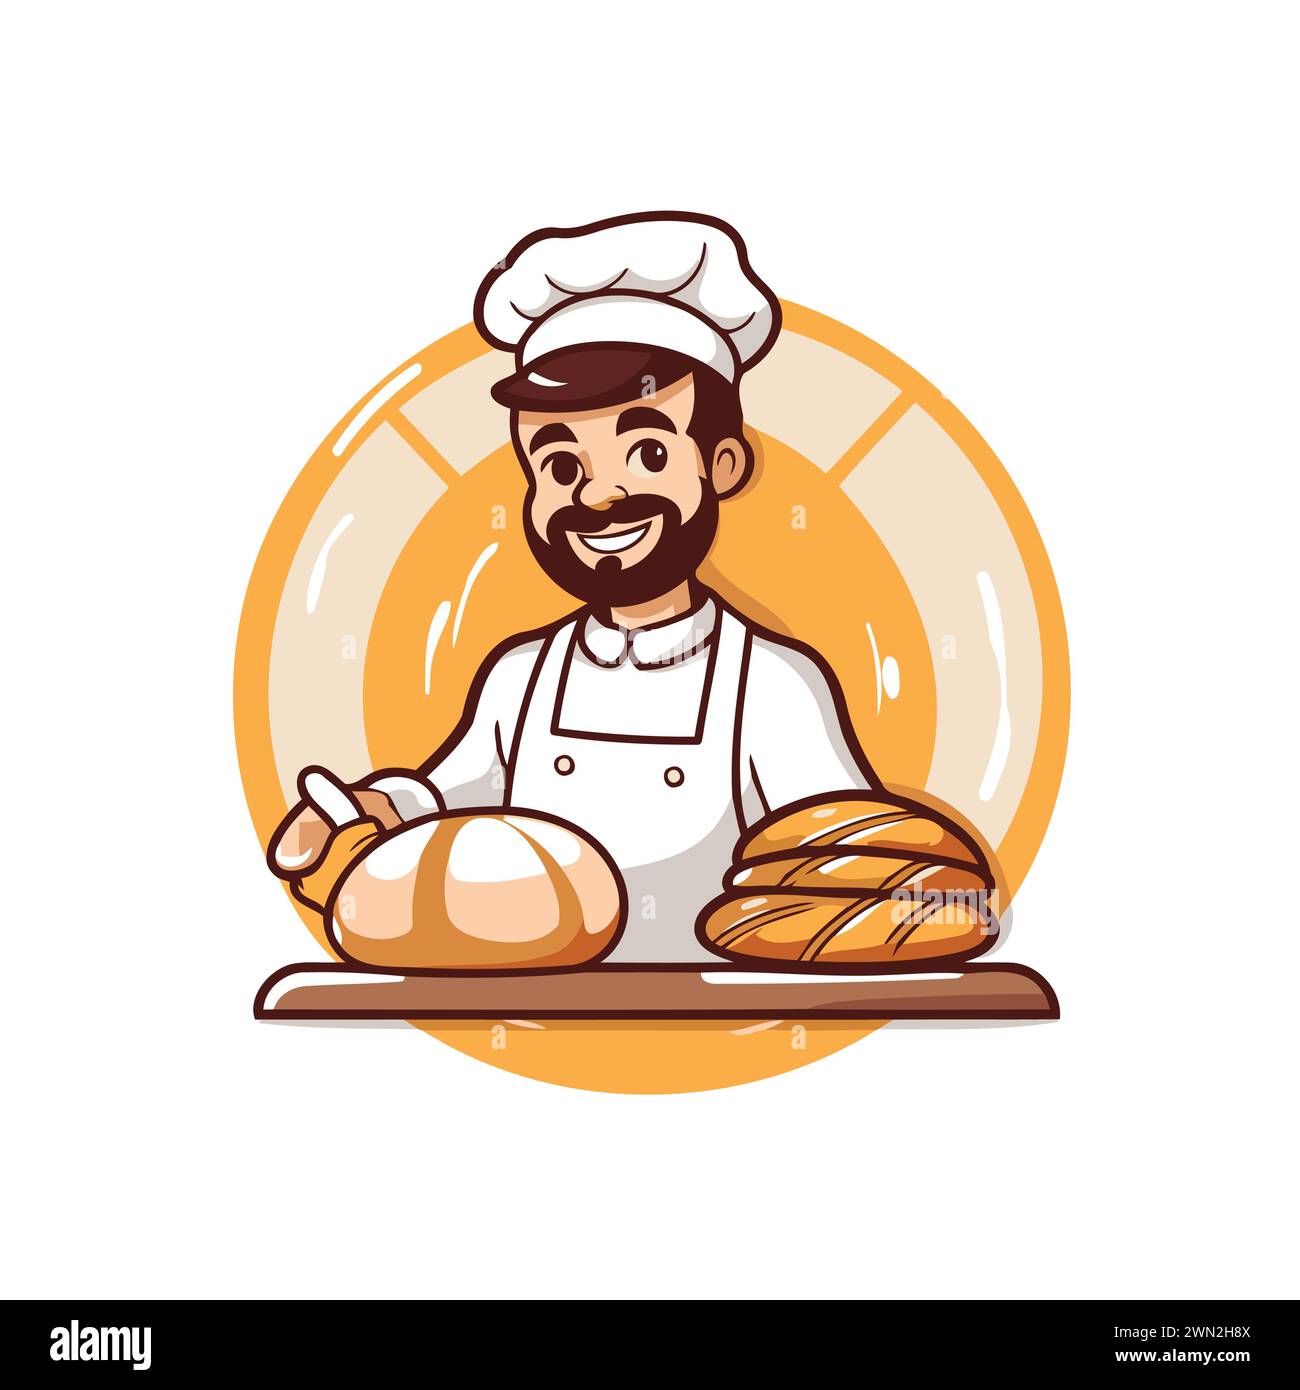 Chef with bread and croissant cartoon vector illustration graphic design Stock Vector